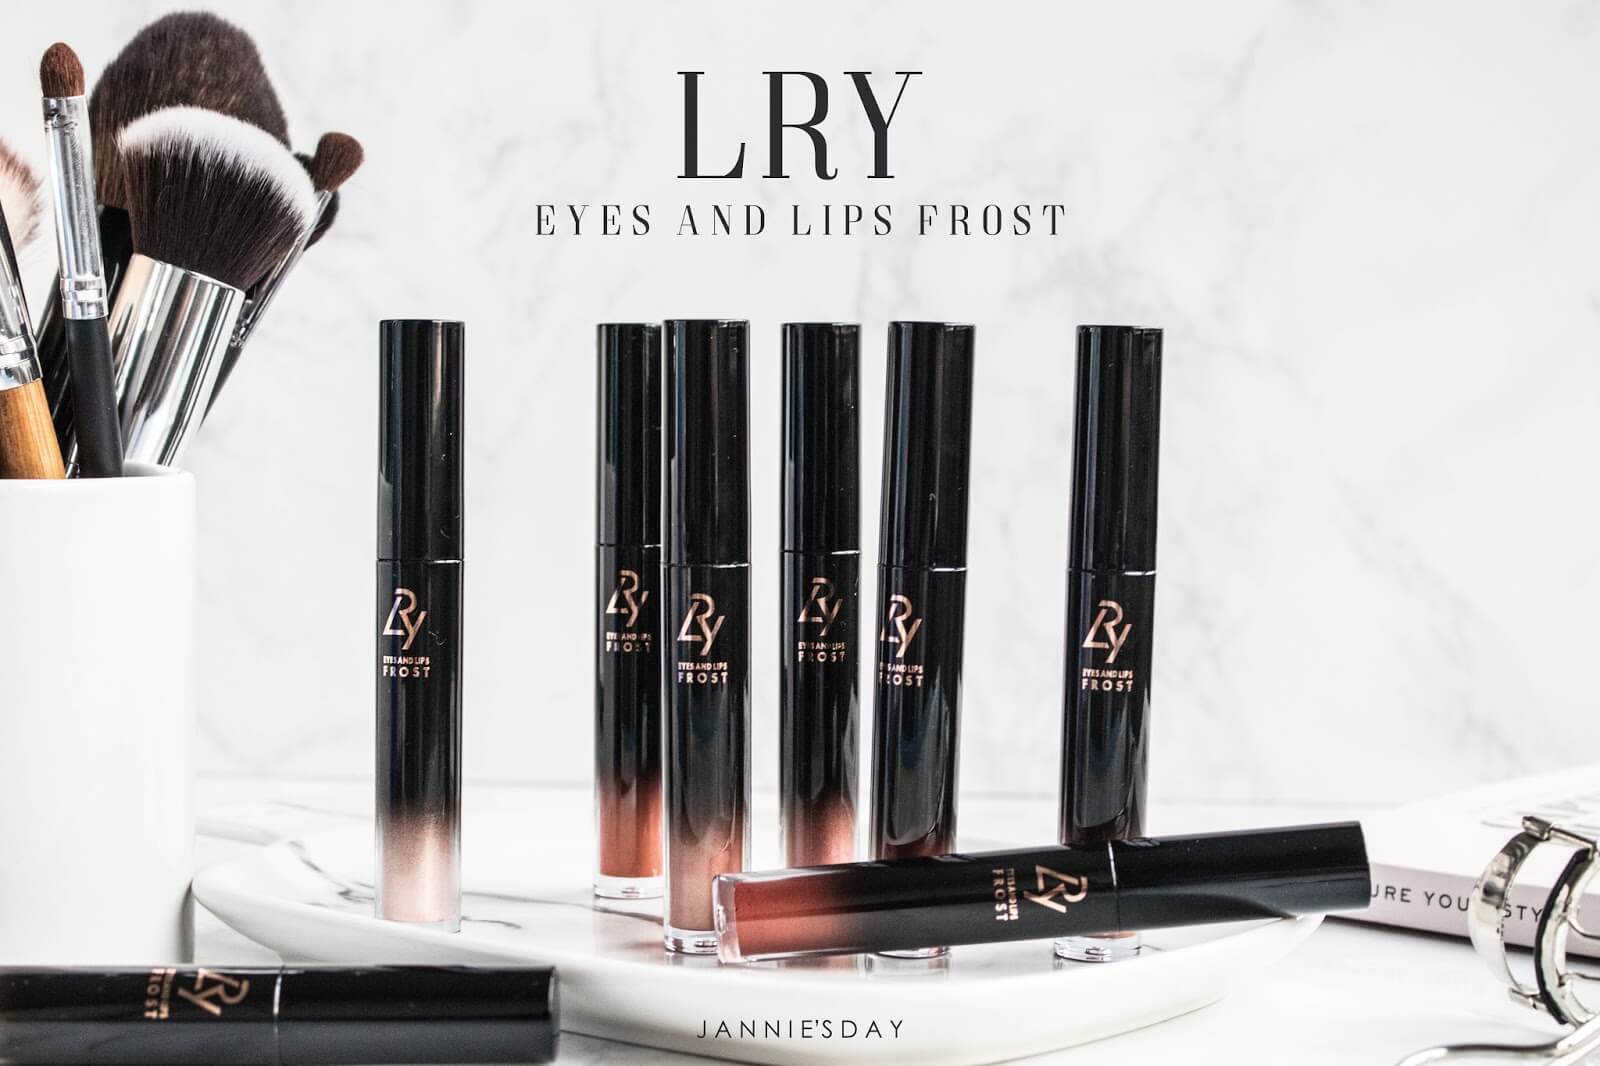 LRY Eyes And Lips Frost #F1 Snow Coated,LRY,LRY Eyes And Lips Frost,F1 Snow Coated,LRY (แอลลี่ย์) ,อาย แอนด์ ลิป,LRY Eyes And Lips Frost #F1 Snow Coatedราคา,LRY Eyes And Lips Frost #F1 Snow Coatedรีวิว